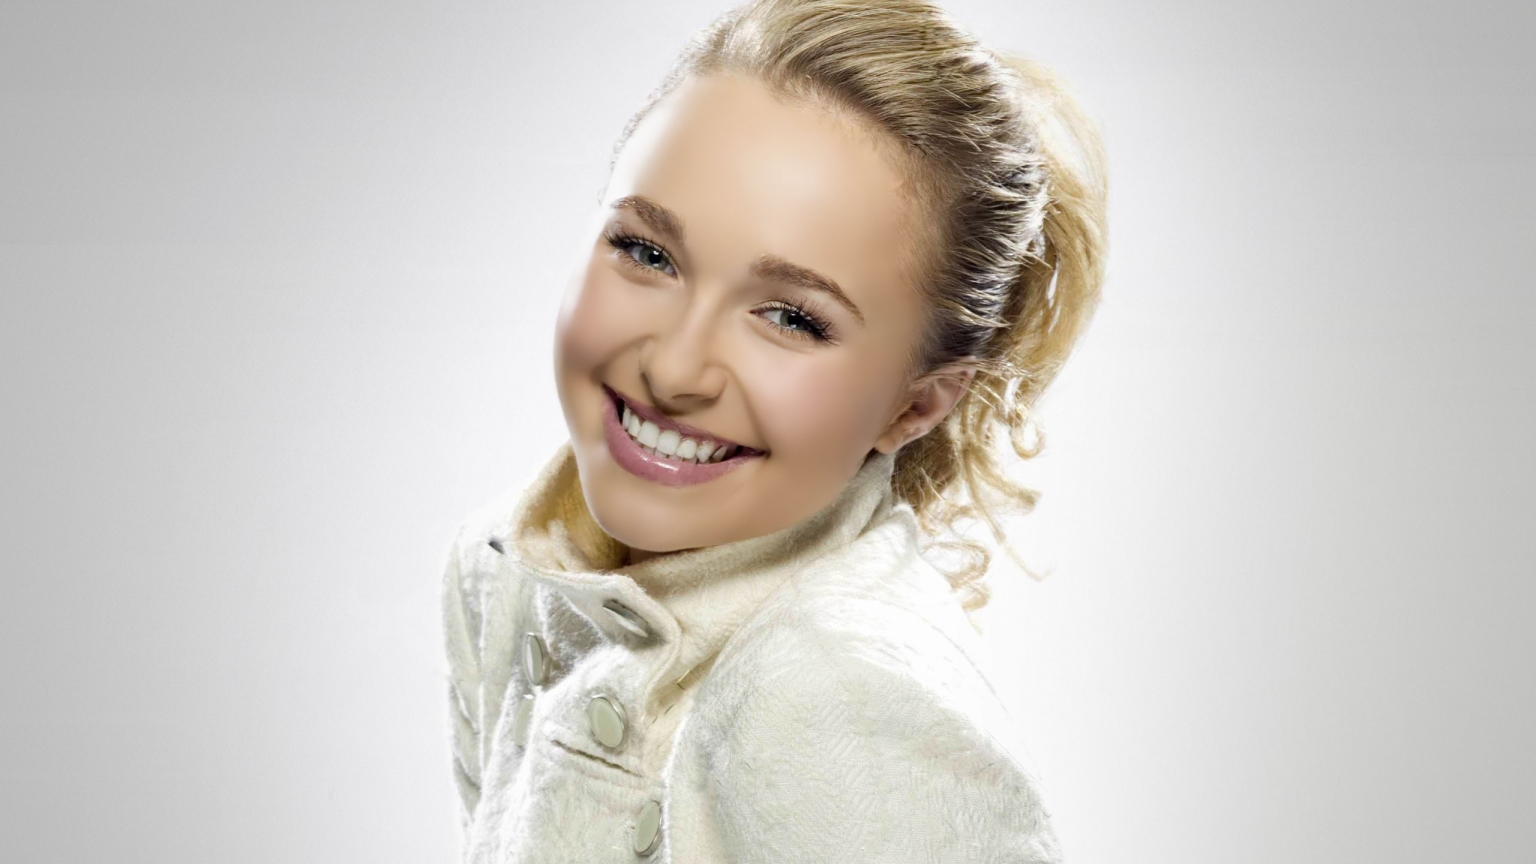 Hayden Panettiere Cute Smile for 1536 x 864 HDTV resolution